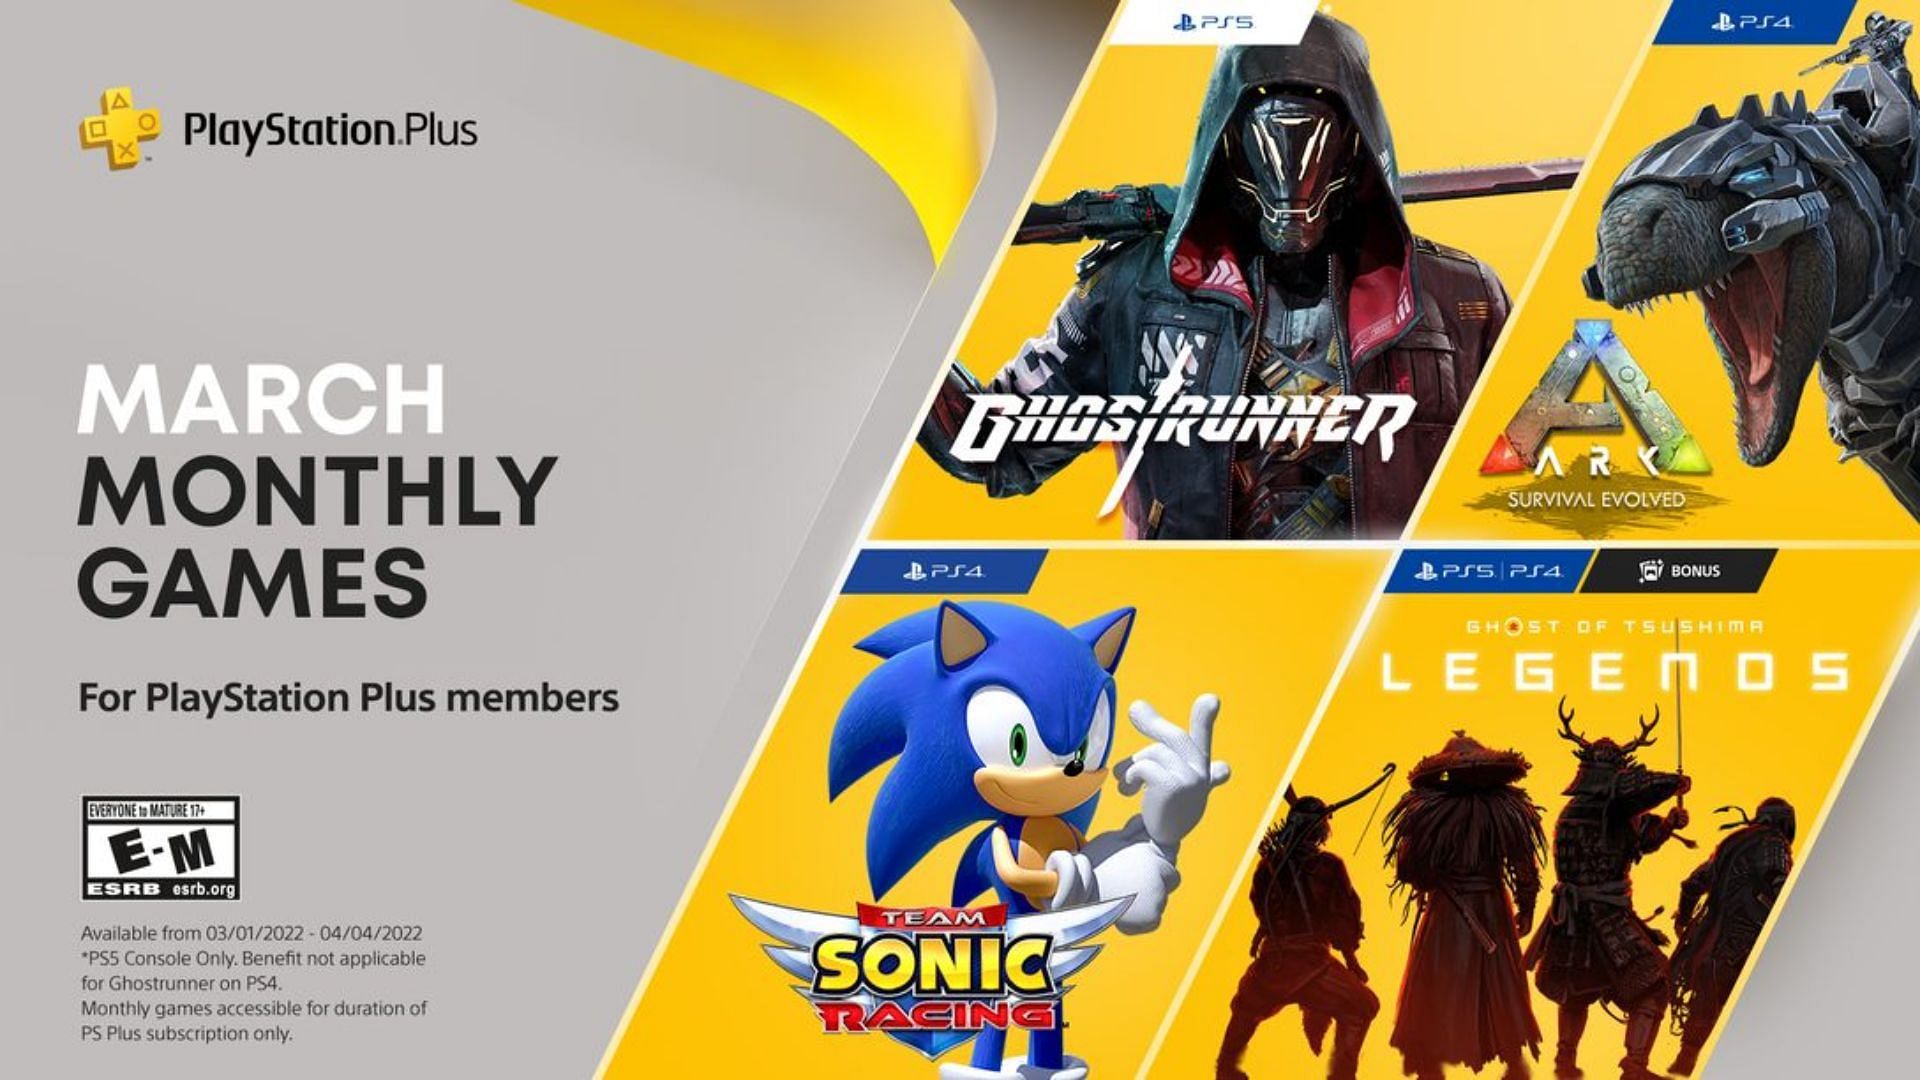 PS Plus free March 2022 games: Release date and time for all regions (Image by PlayStation)